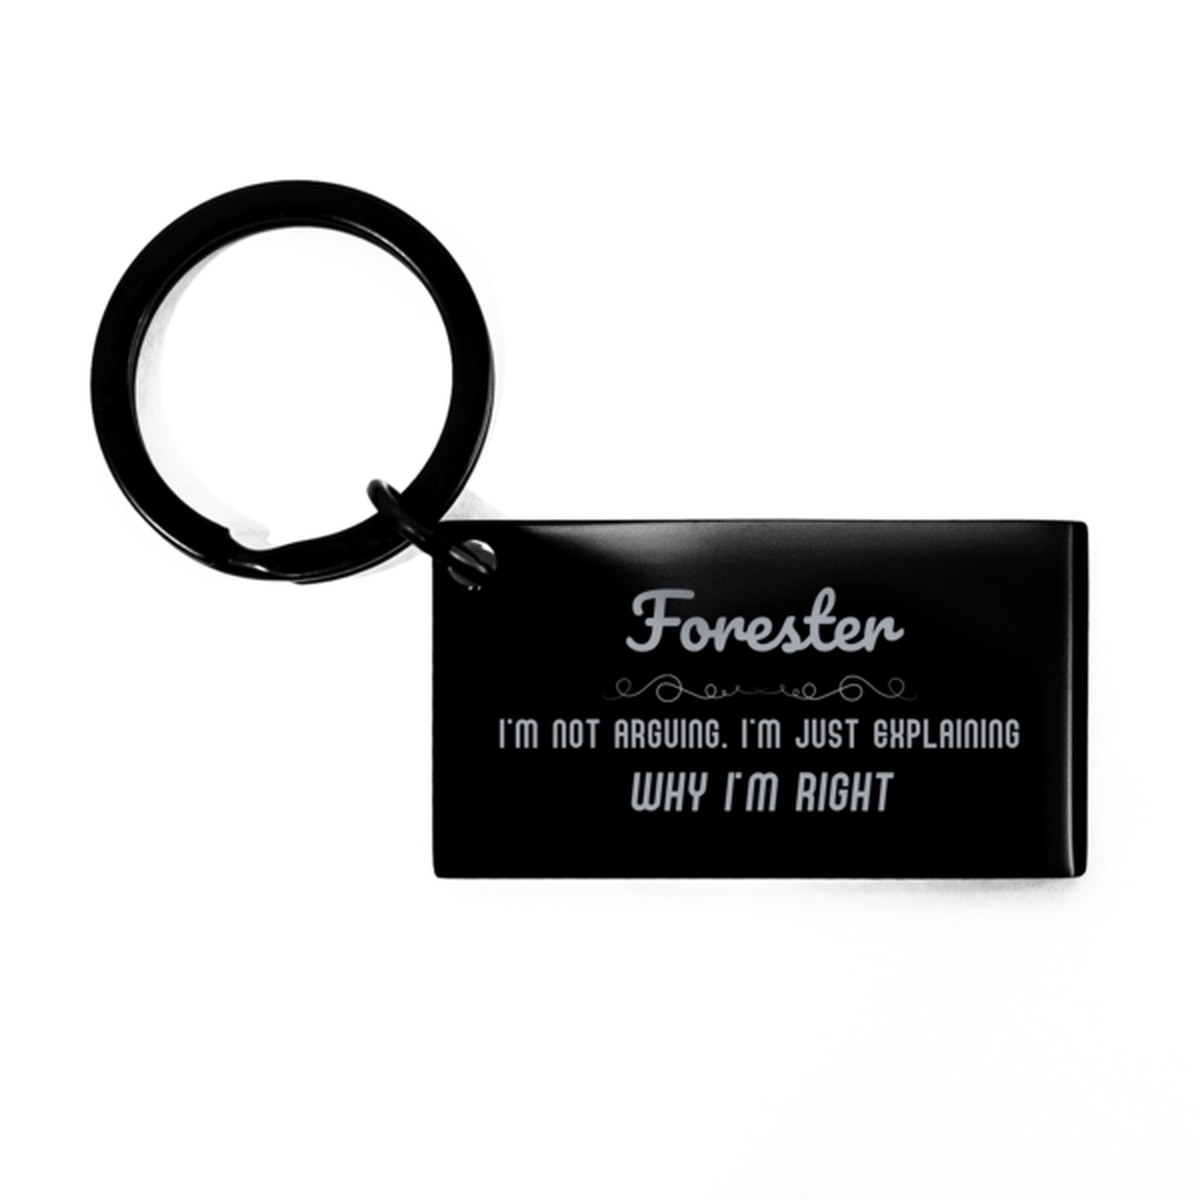 Forester I'm not Arguing. I'm Just Explaining Why I'm RIGHT Keychain, Funny Saying Quote Forester Gifts For Forester Graduation Birthday Christmas Gifts for Men Women Coworker